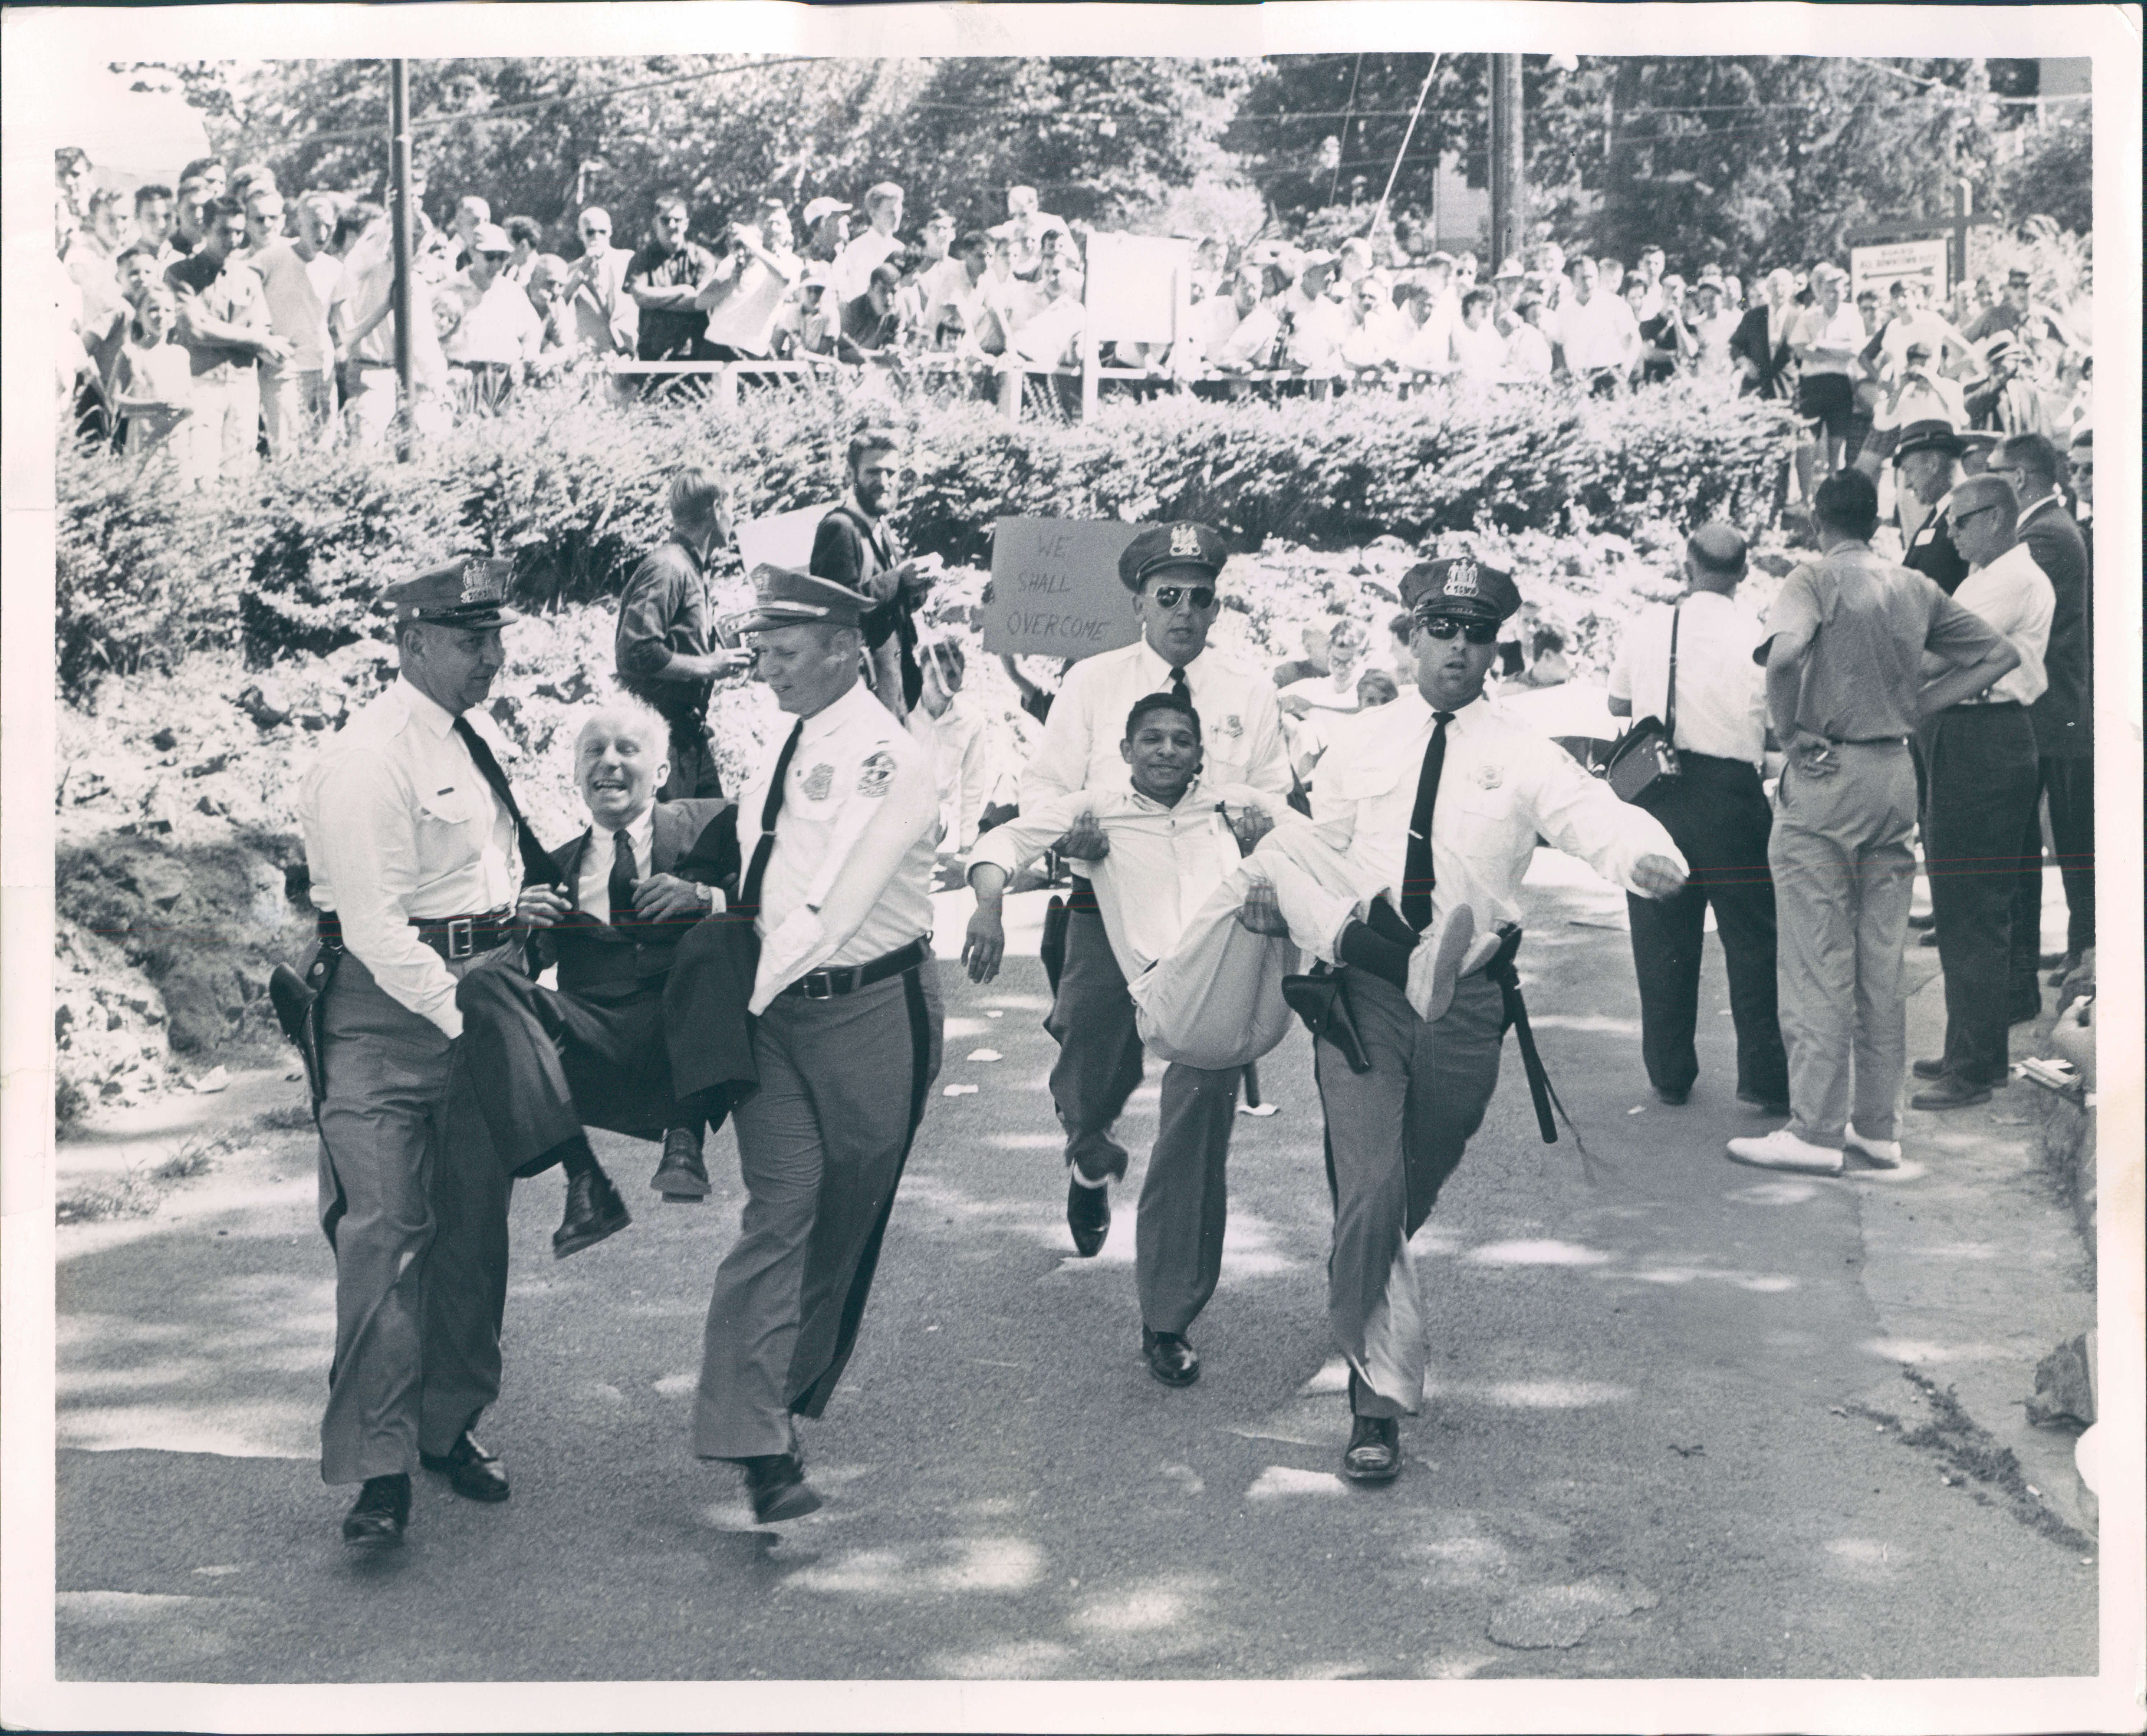 July 5, 1963 - ALLEY OOP -- Baltimore county policemen carry a demonstrator from Gwynn Oak park. Protestors numbered in the hundreds. Photo by Walter M. McCardell AGU-123-BSDate Created: 1963-07-04 Copyright Notice: Baltimore Sun Folder Description: Segregation Folder Extended Description: Baltimore and Maryland Title: SEGREGATION BALTIMORE AND MARYLAND